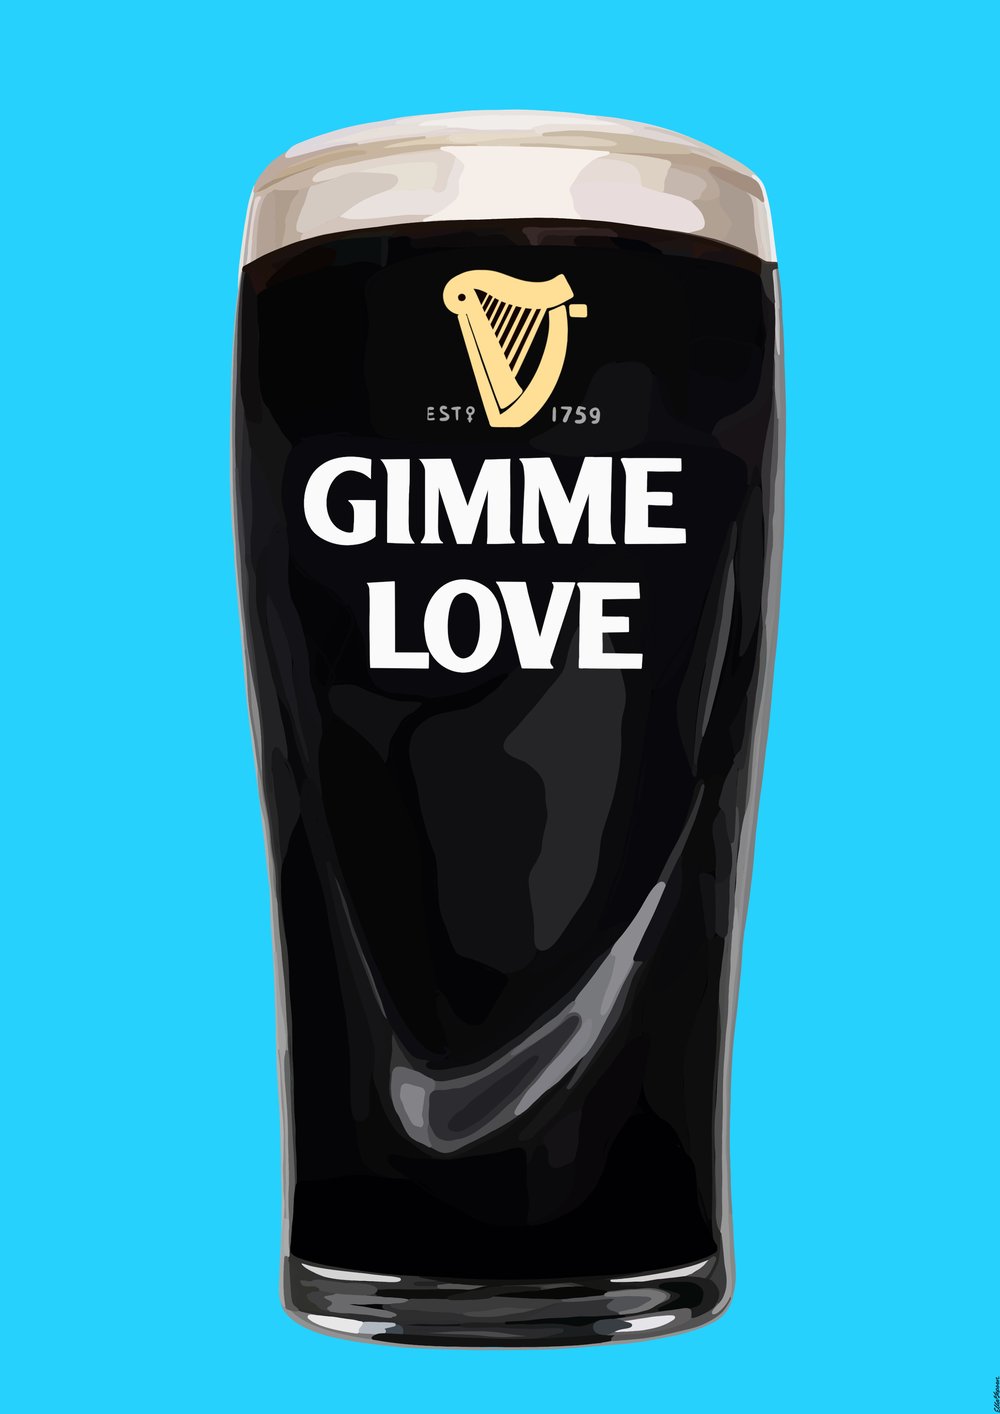 Image of Gimme love guinness